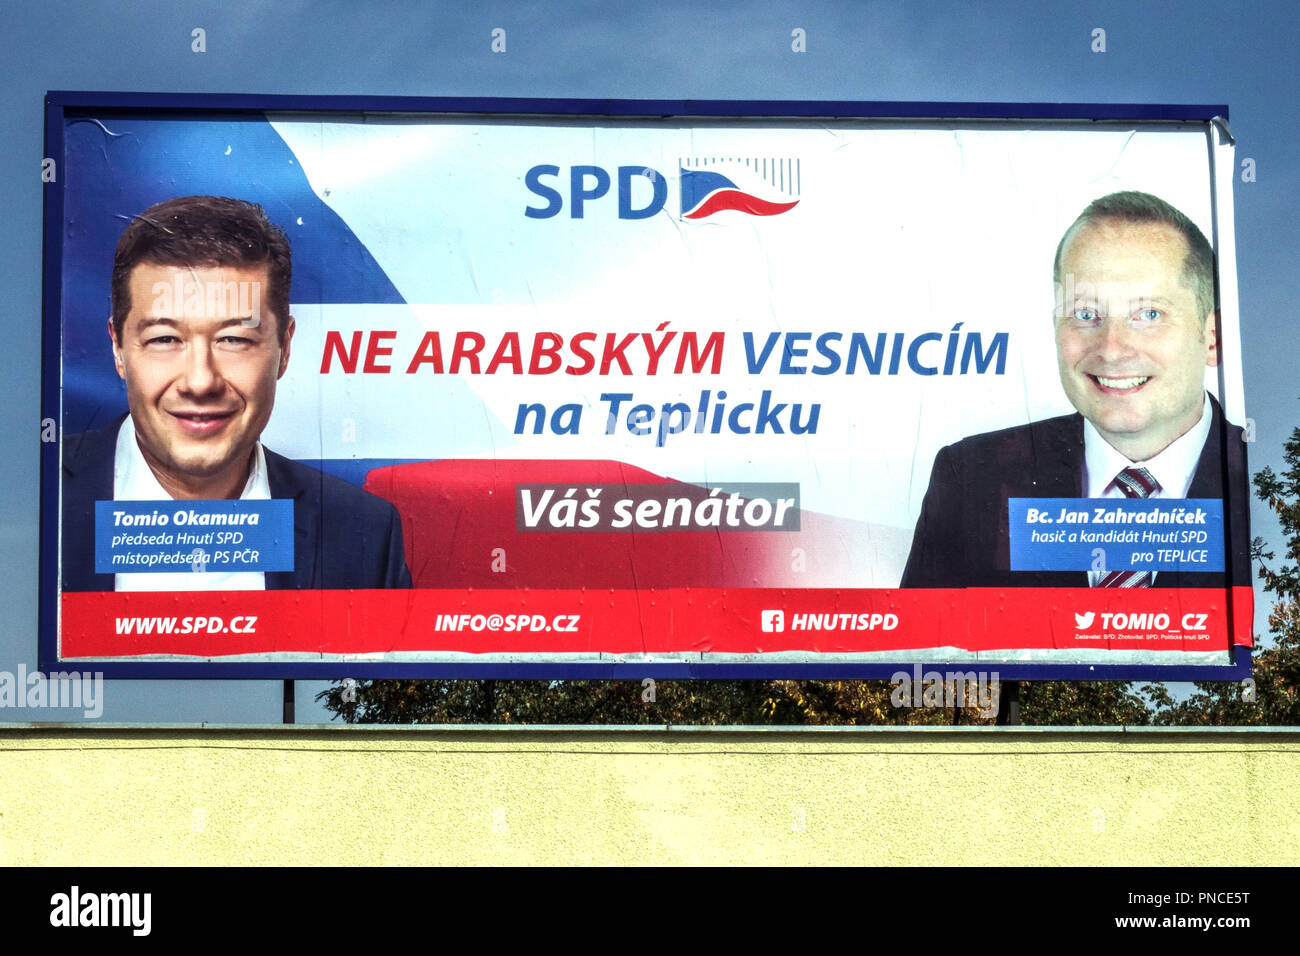 Tomio Okamura, leader of the SPD party, Not for the Arabian villages in the Teplice region, electoral billboard Stock Photo